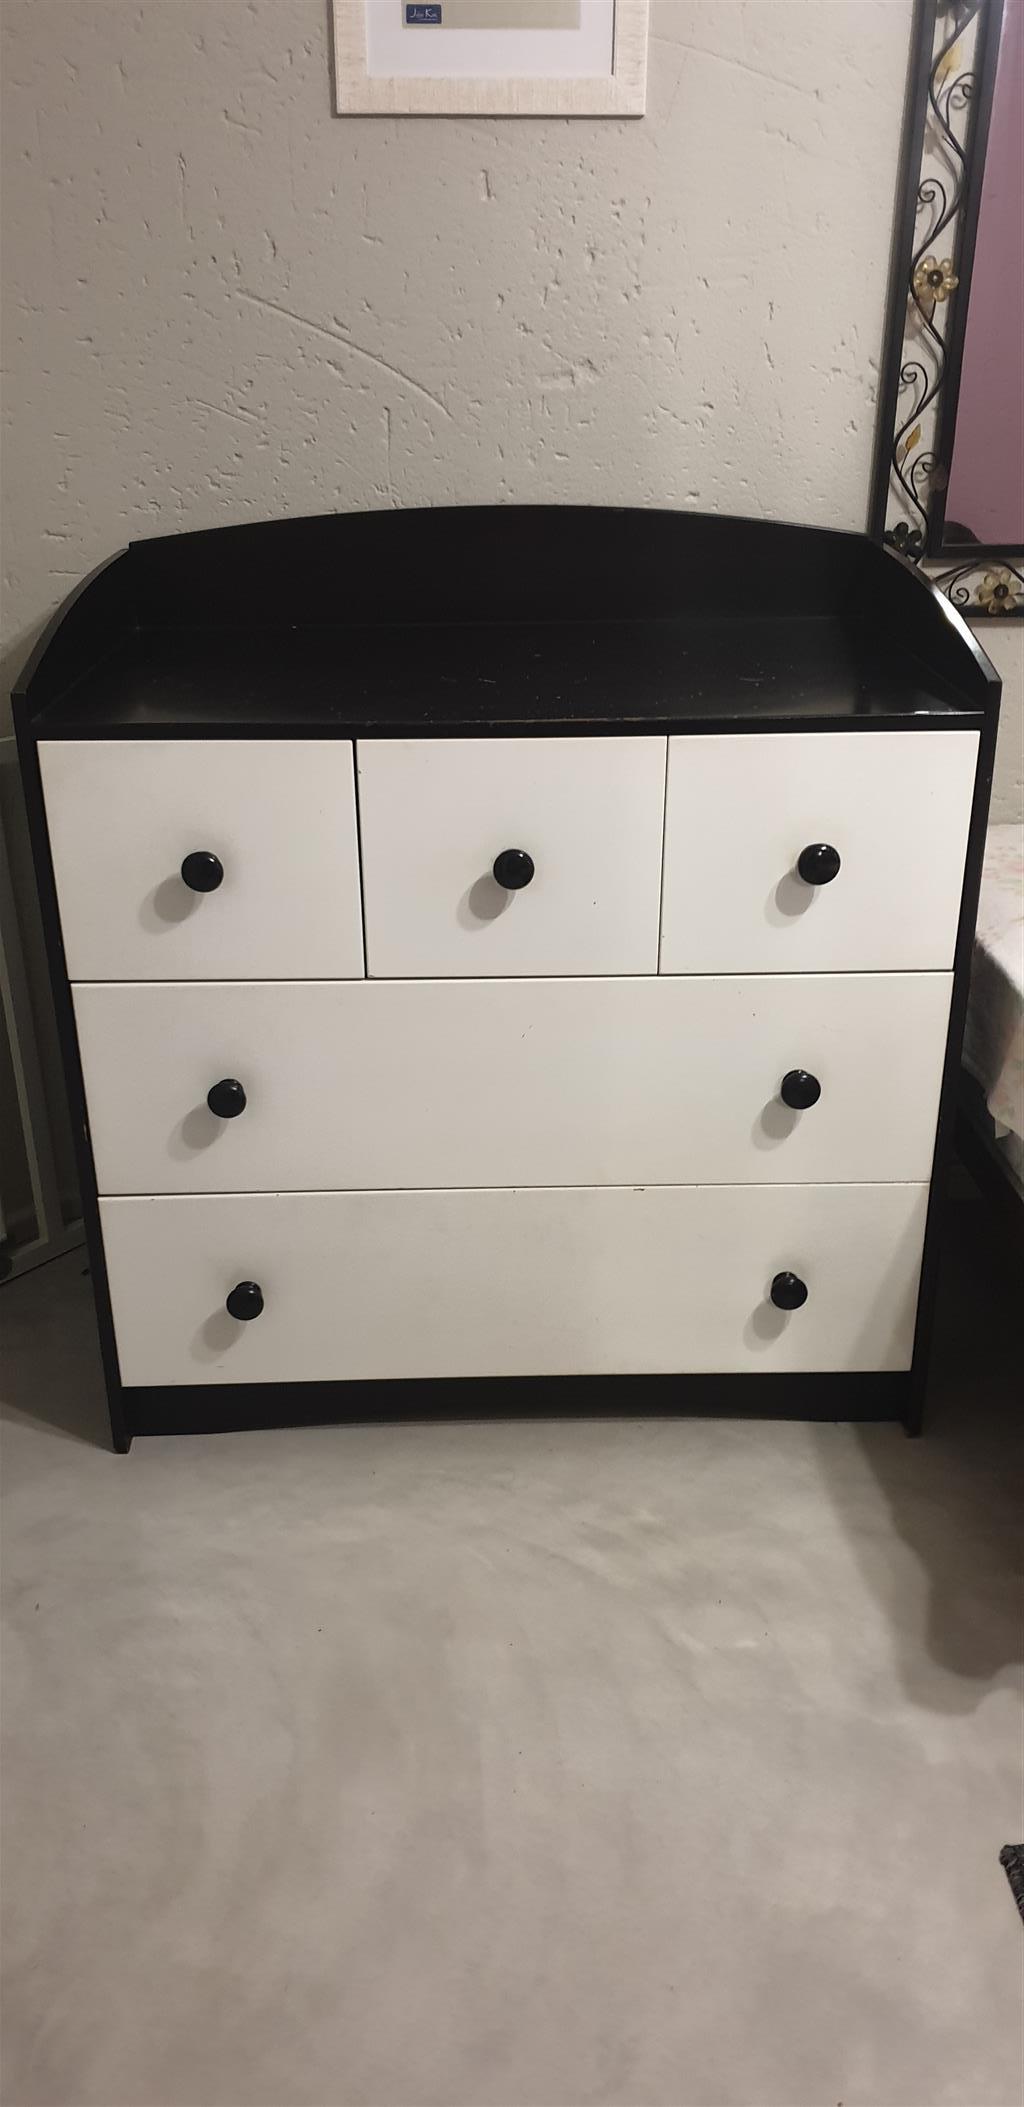 Compactum For Sale Black And White Junk Mail